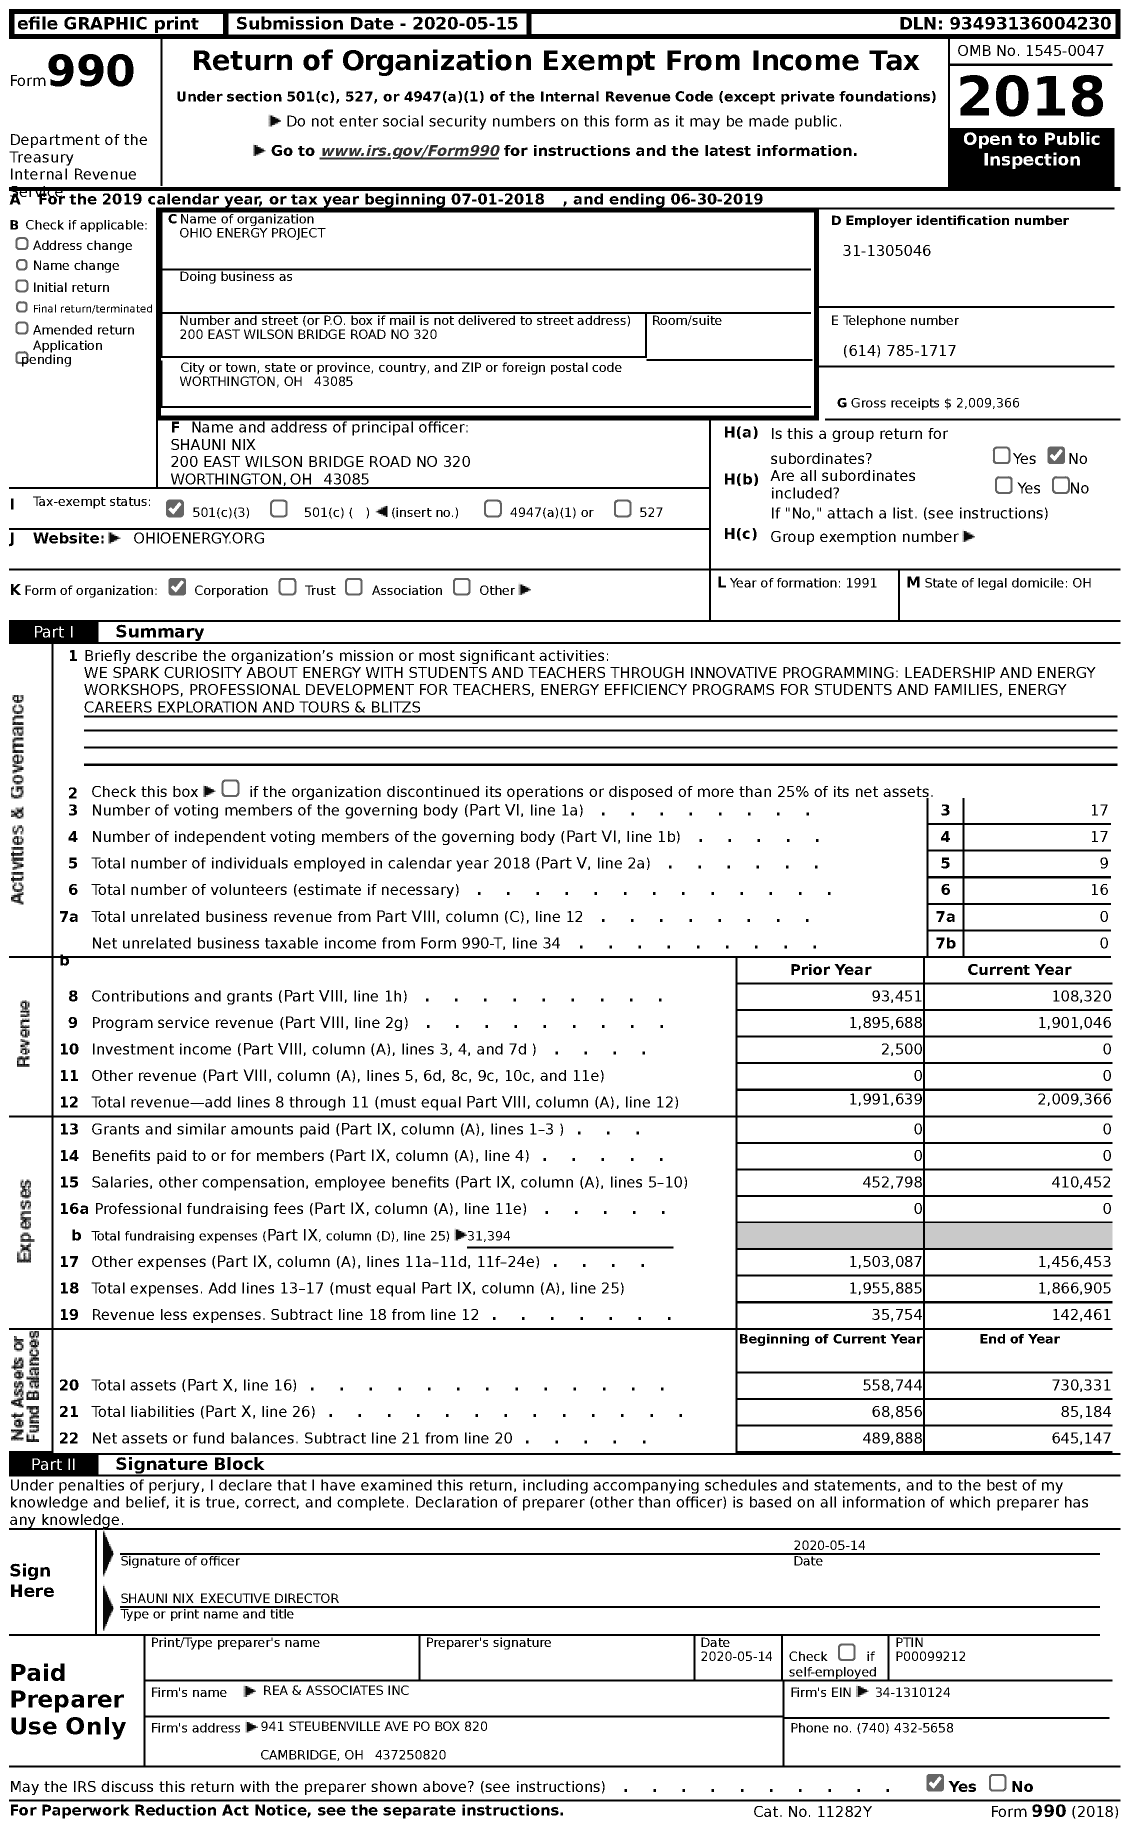 Image of first page of 2018 Form 990 for Ohio Energy Project (OEP)